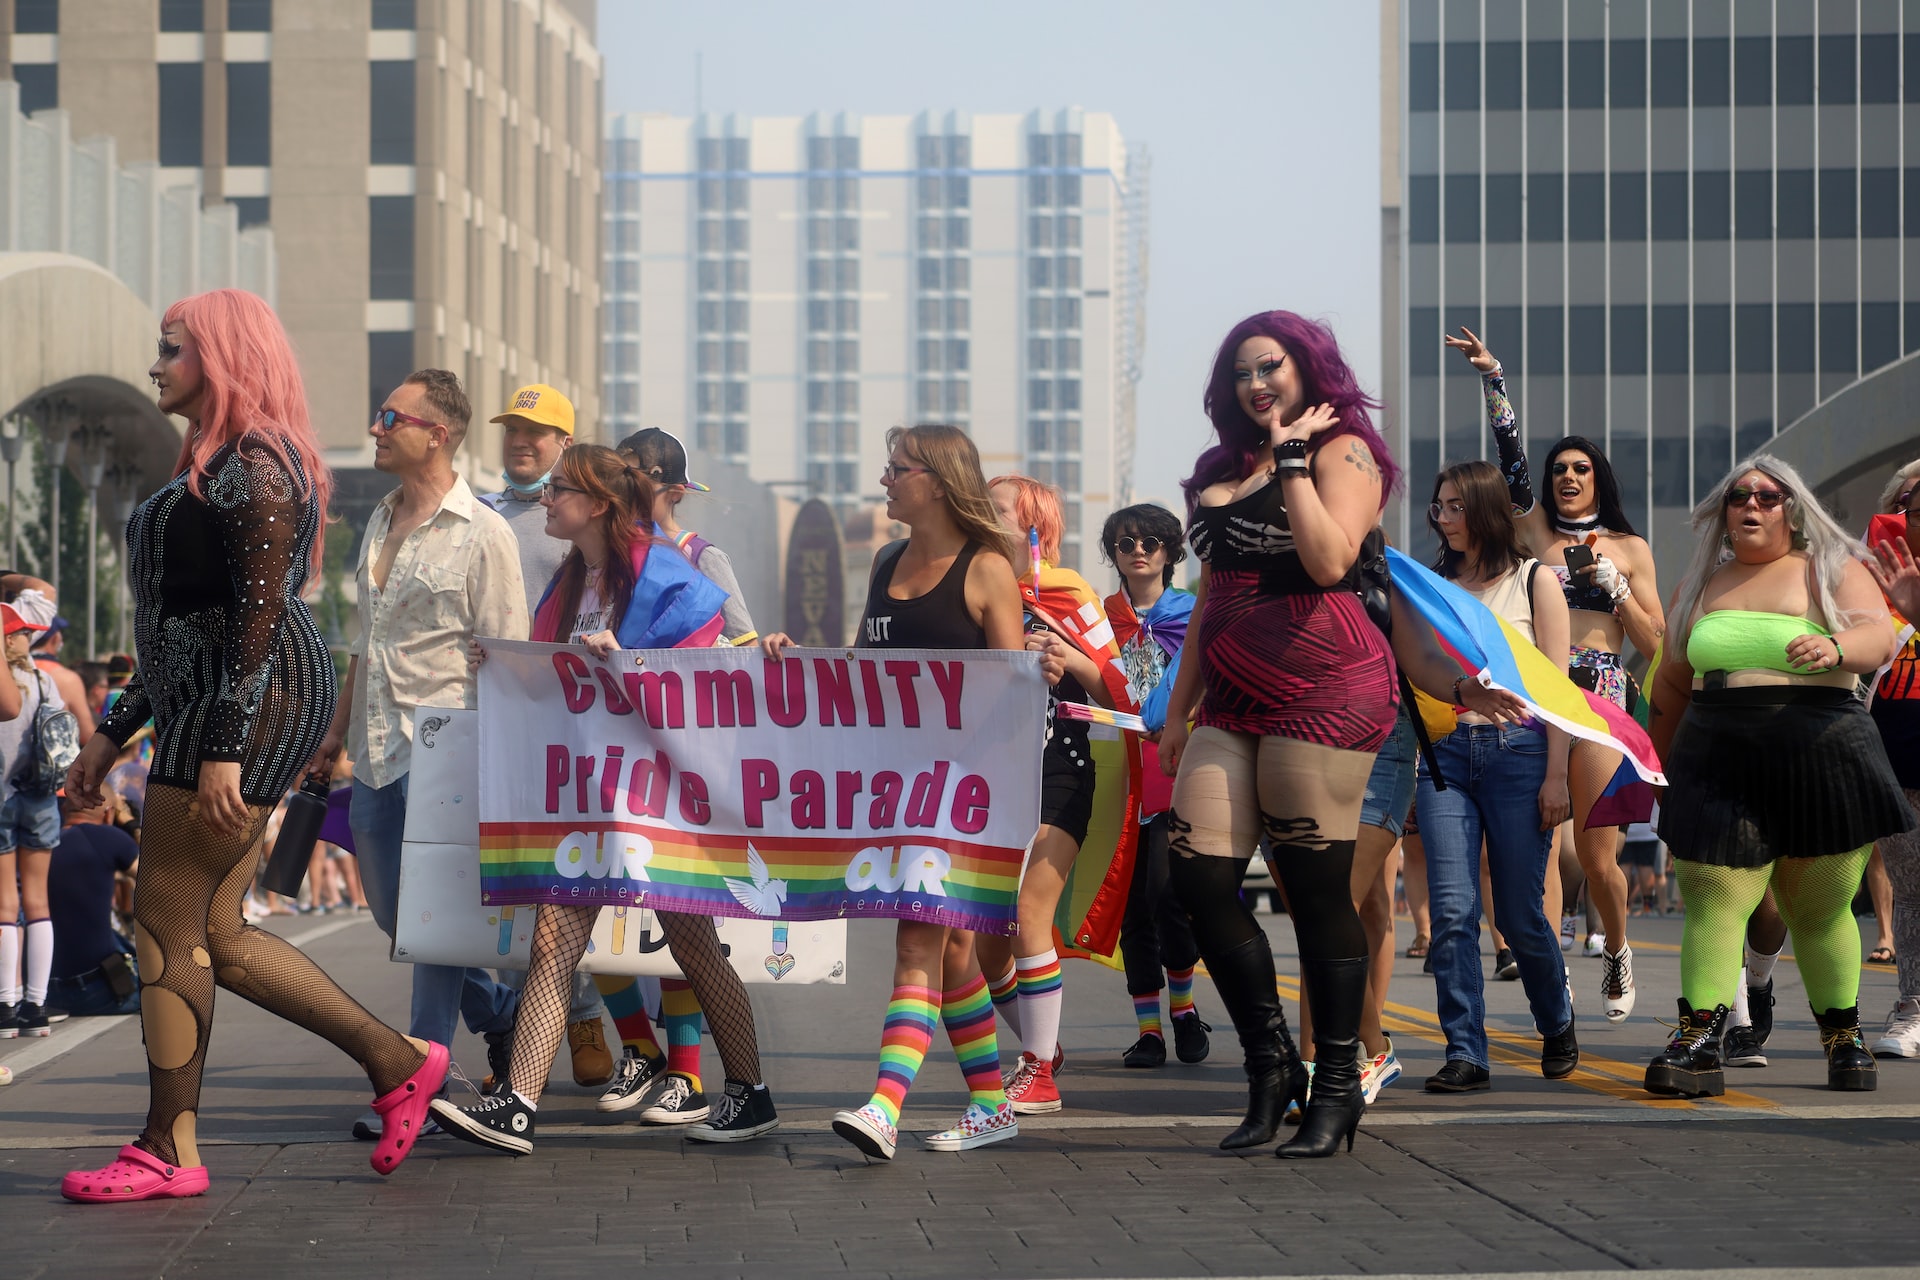 LGBTQ+ individuals in a pride march in Reno, Nevada, with a banner that says ‘CommUnity Pride Parade’